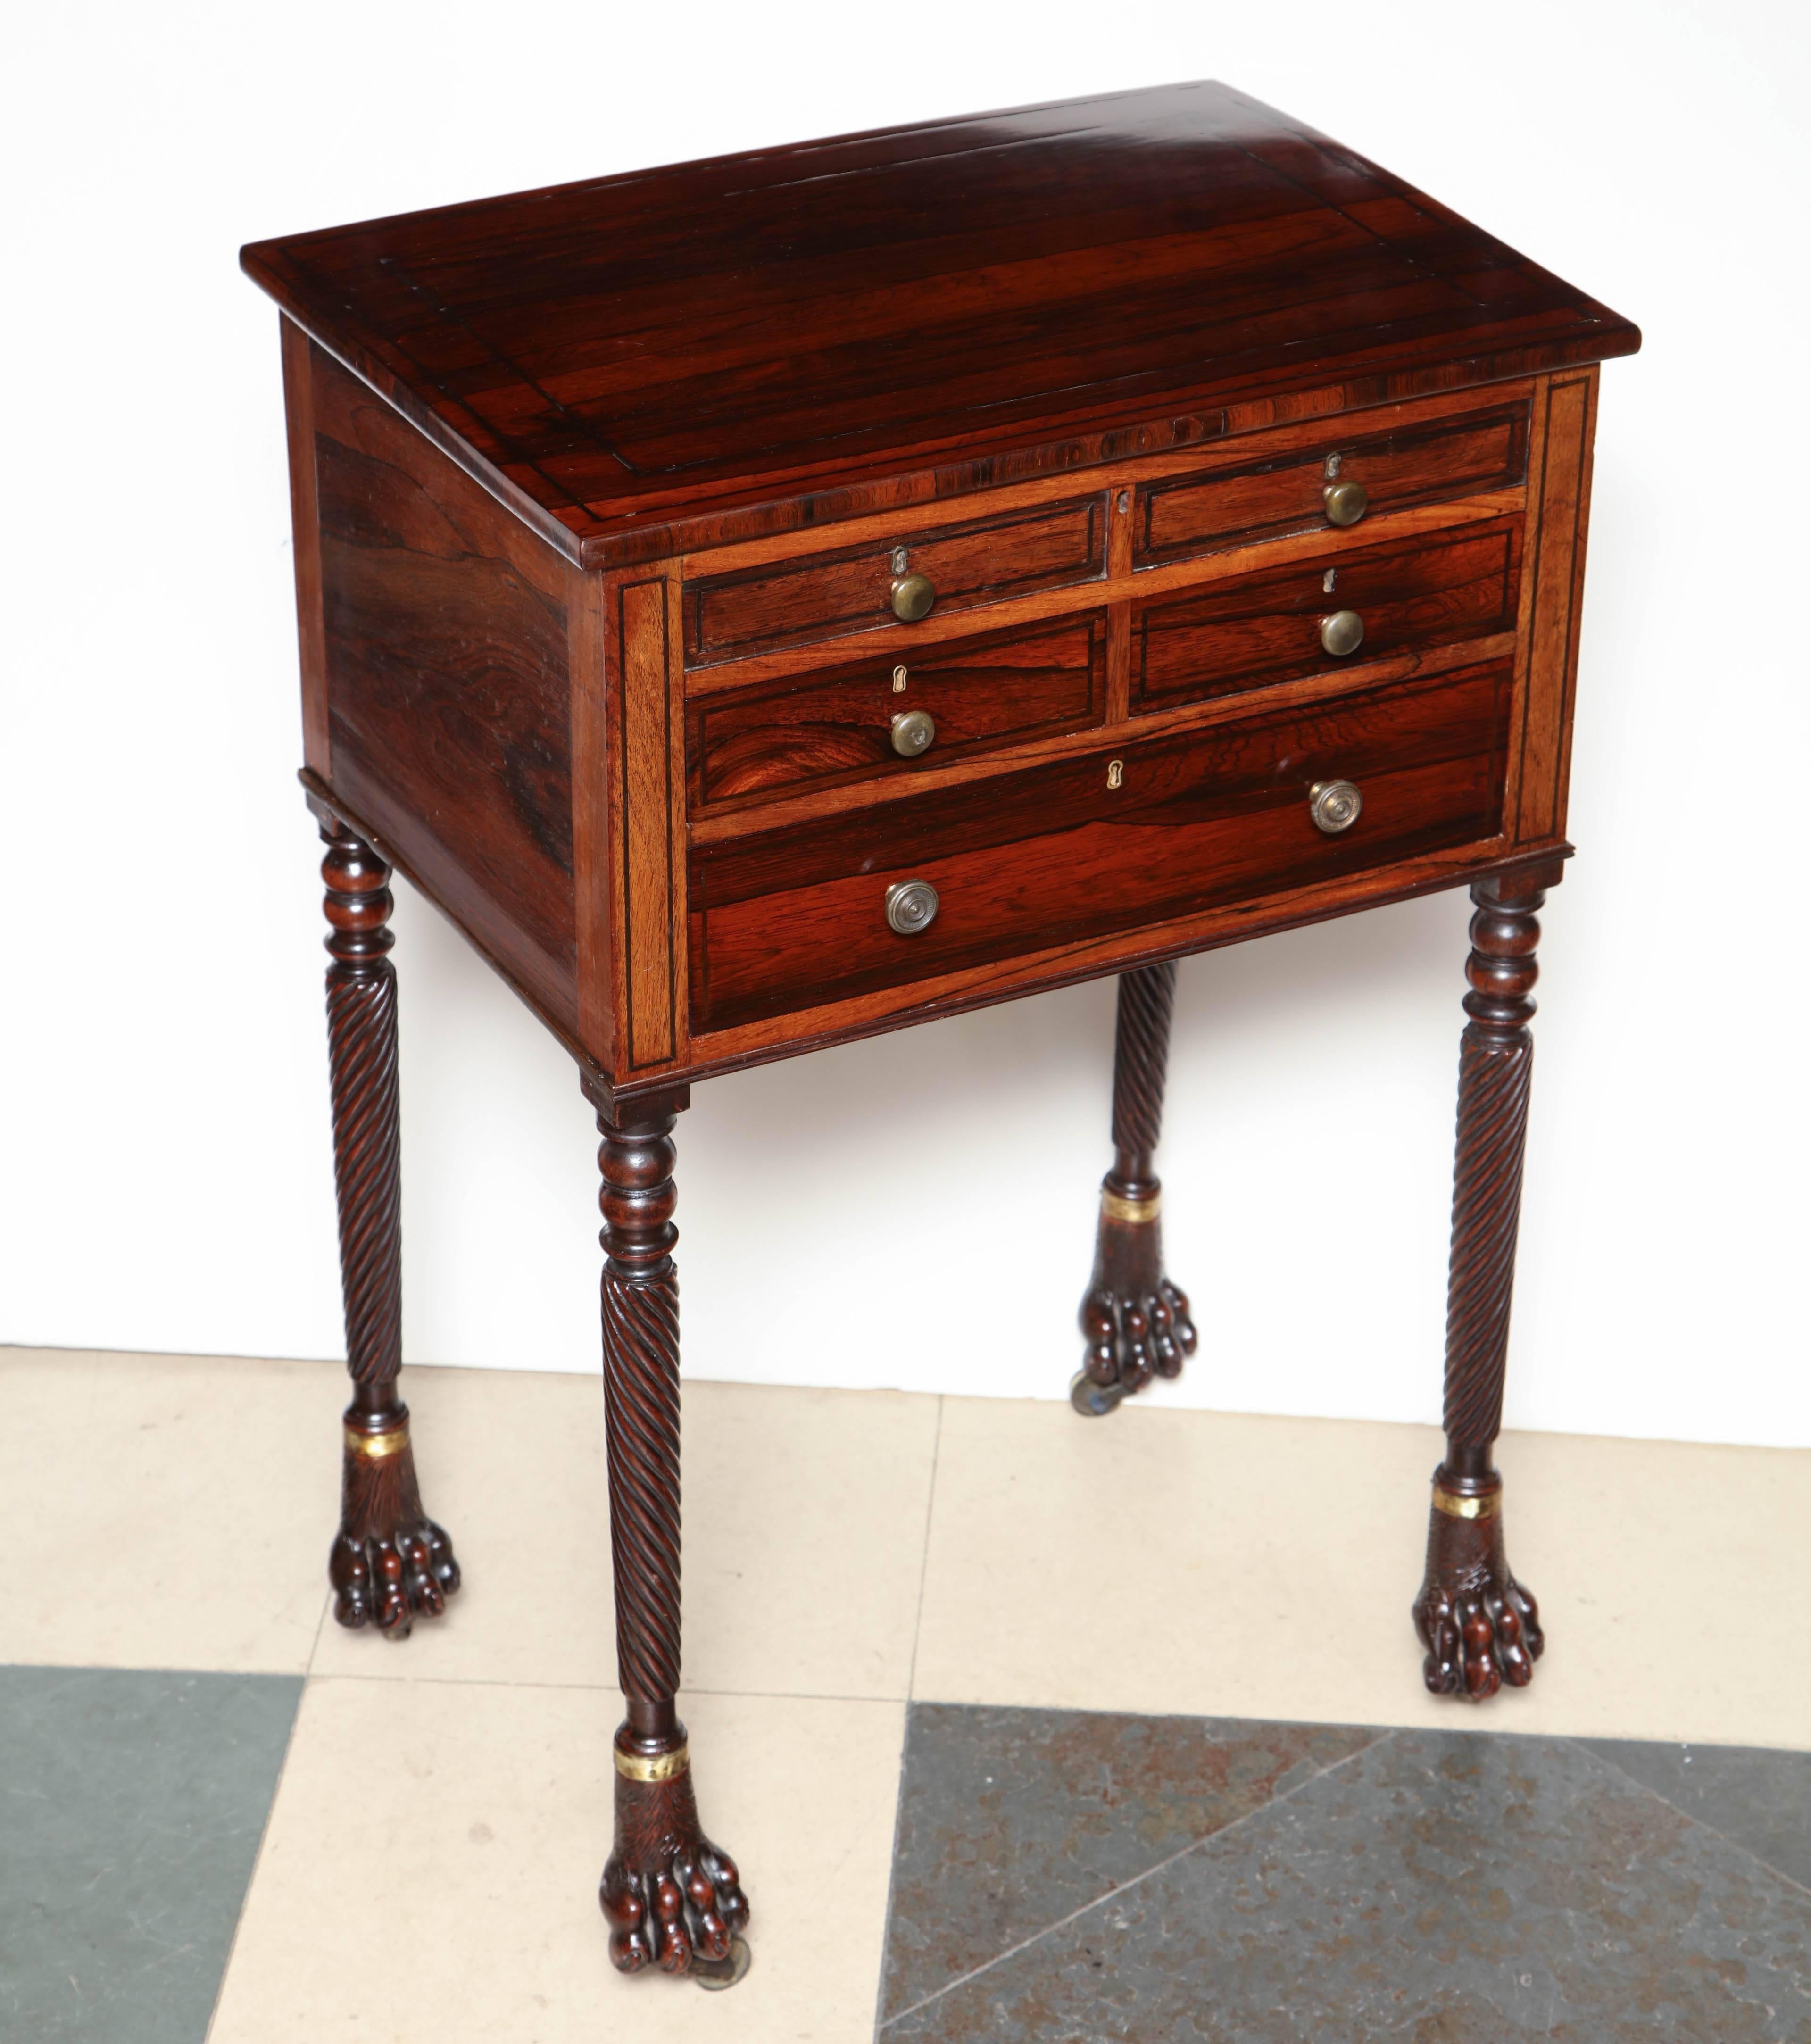 A Regency 19th century rosewood lift top side table with ratchet adjusting interior writing surface on turned and reeded legs and dog paw feet. Attributed to George Oakley.